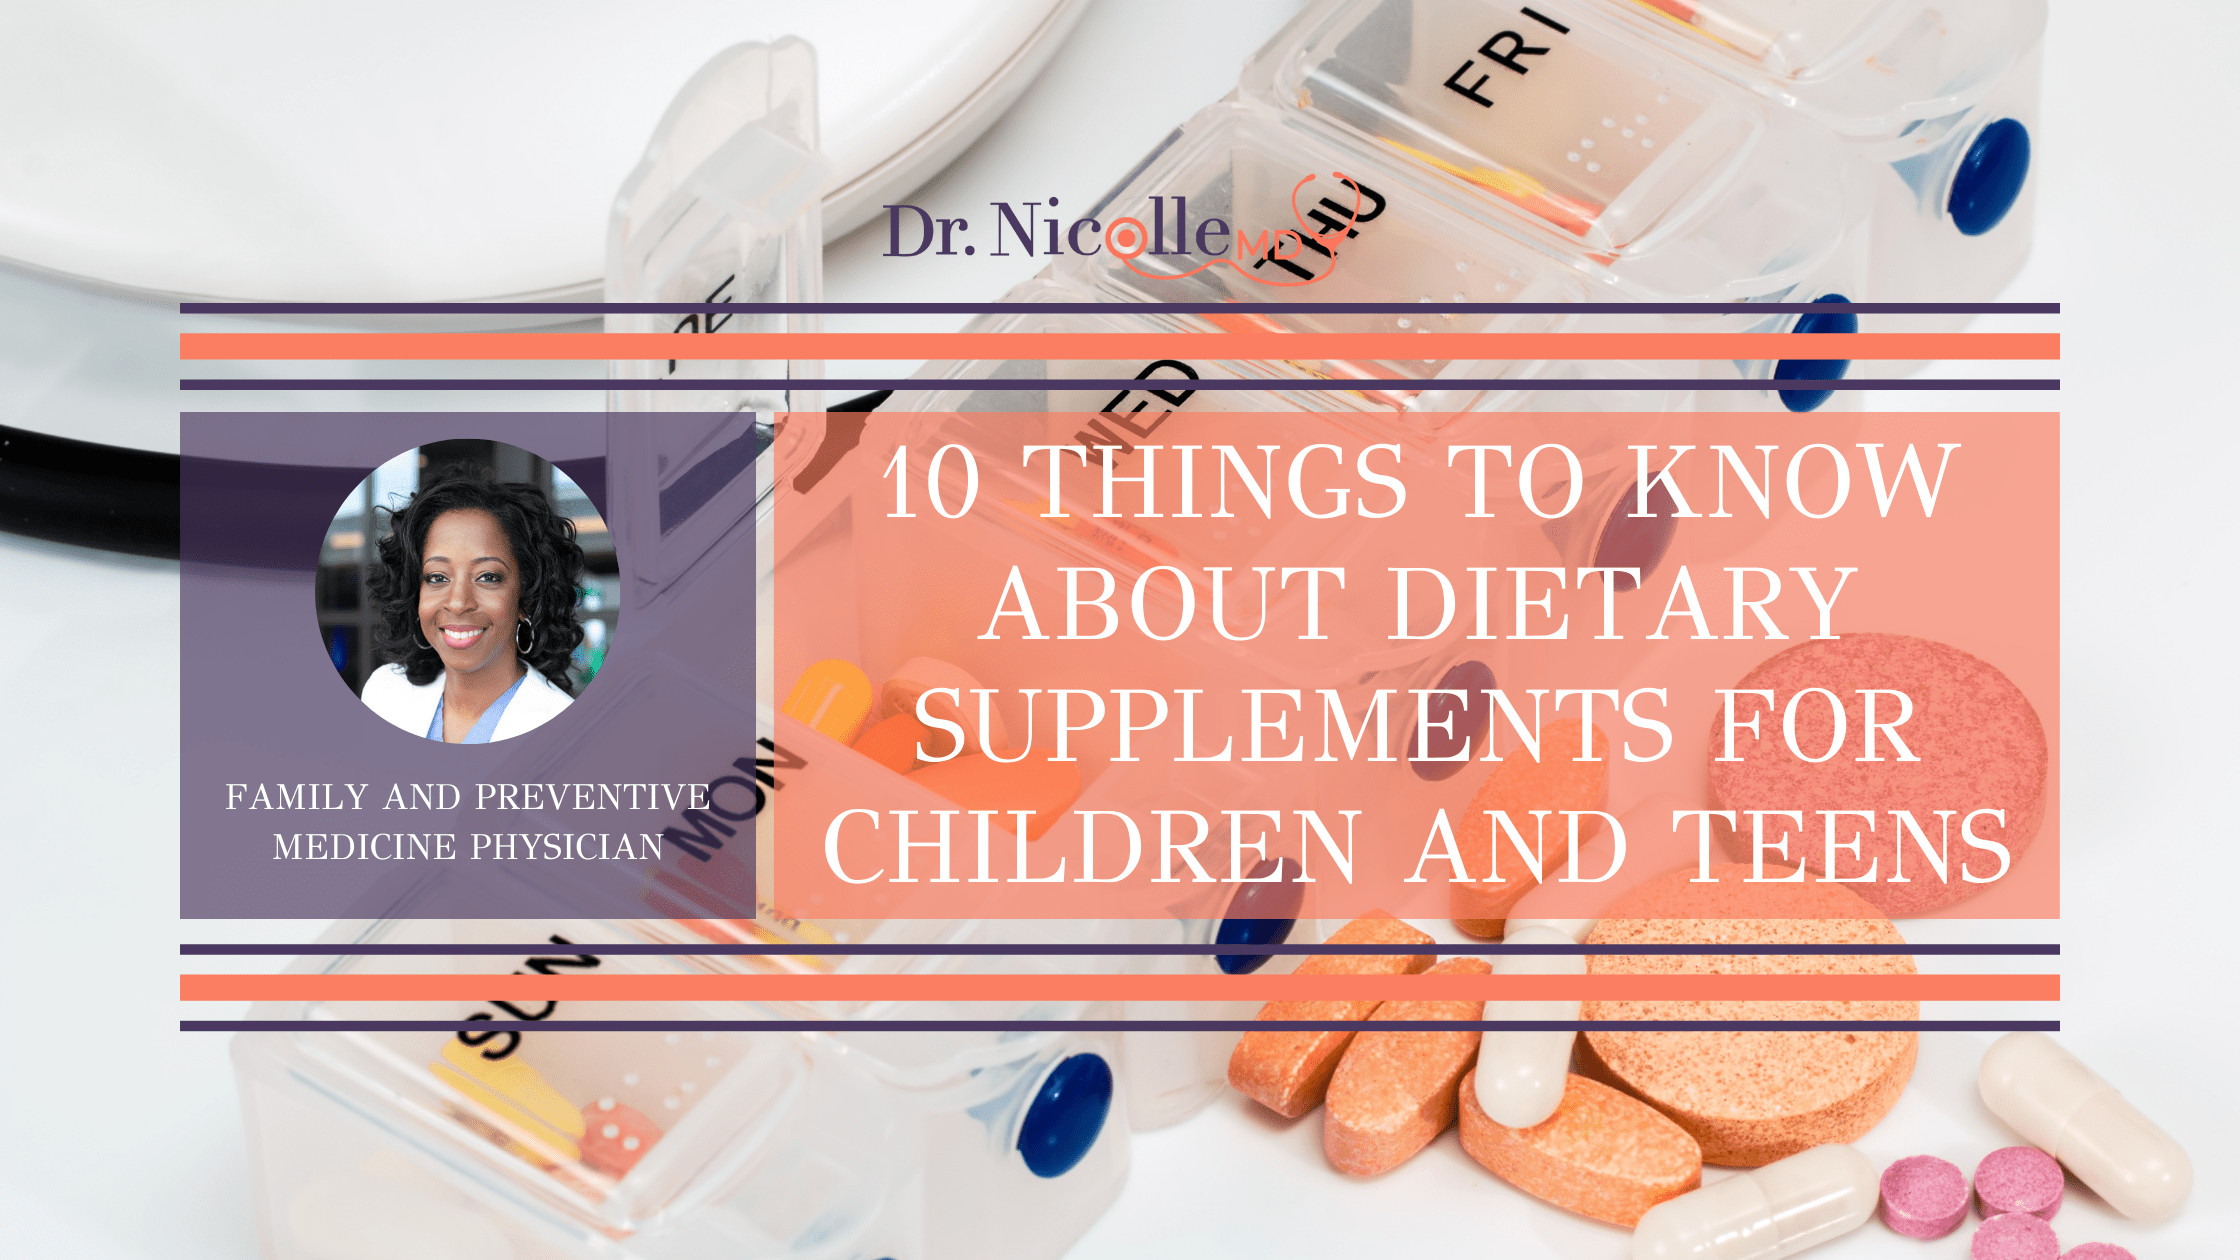 1110 Things To Know About Dietary Supplements for Children and Teens